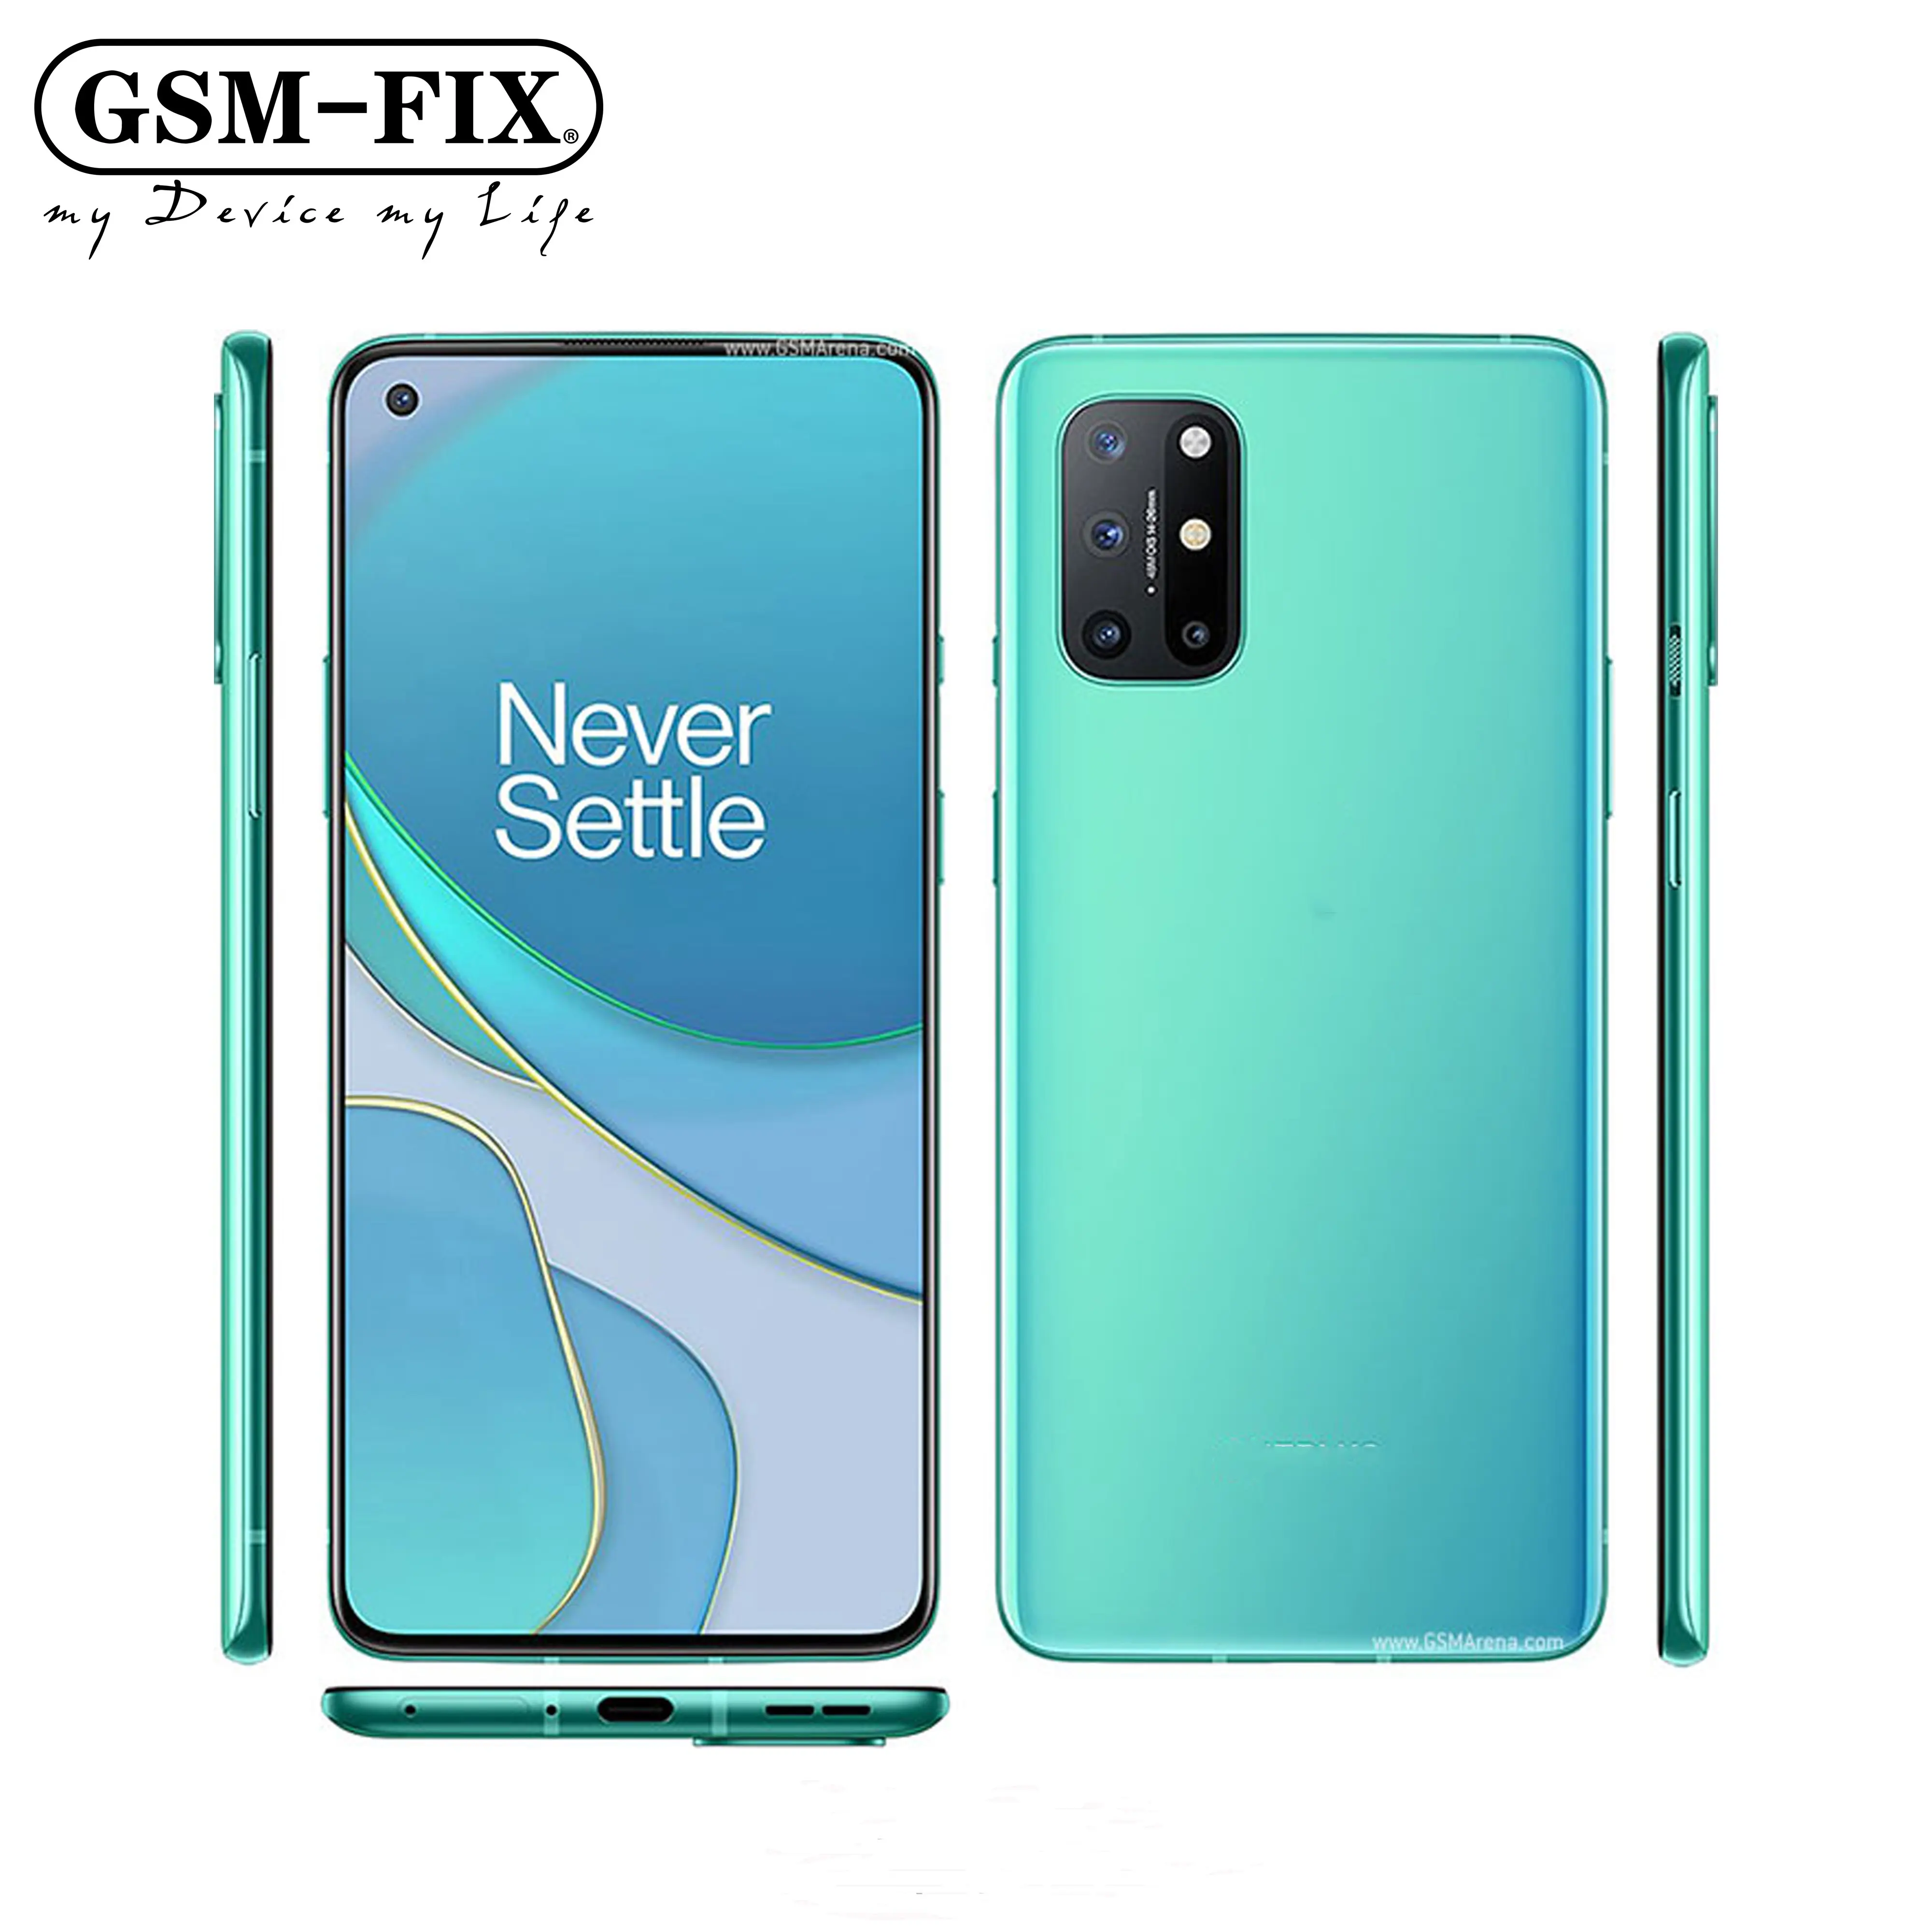 GSM-FIX Hot Selling OnePlus 8T 8GB/12GB 128GB/256GB Mobile Phone 120Hz Display SN 865 65W Warp Charge For One plus 8T Smartphone